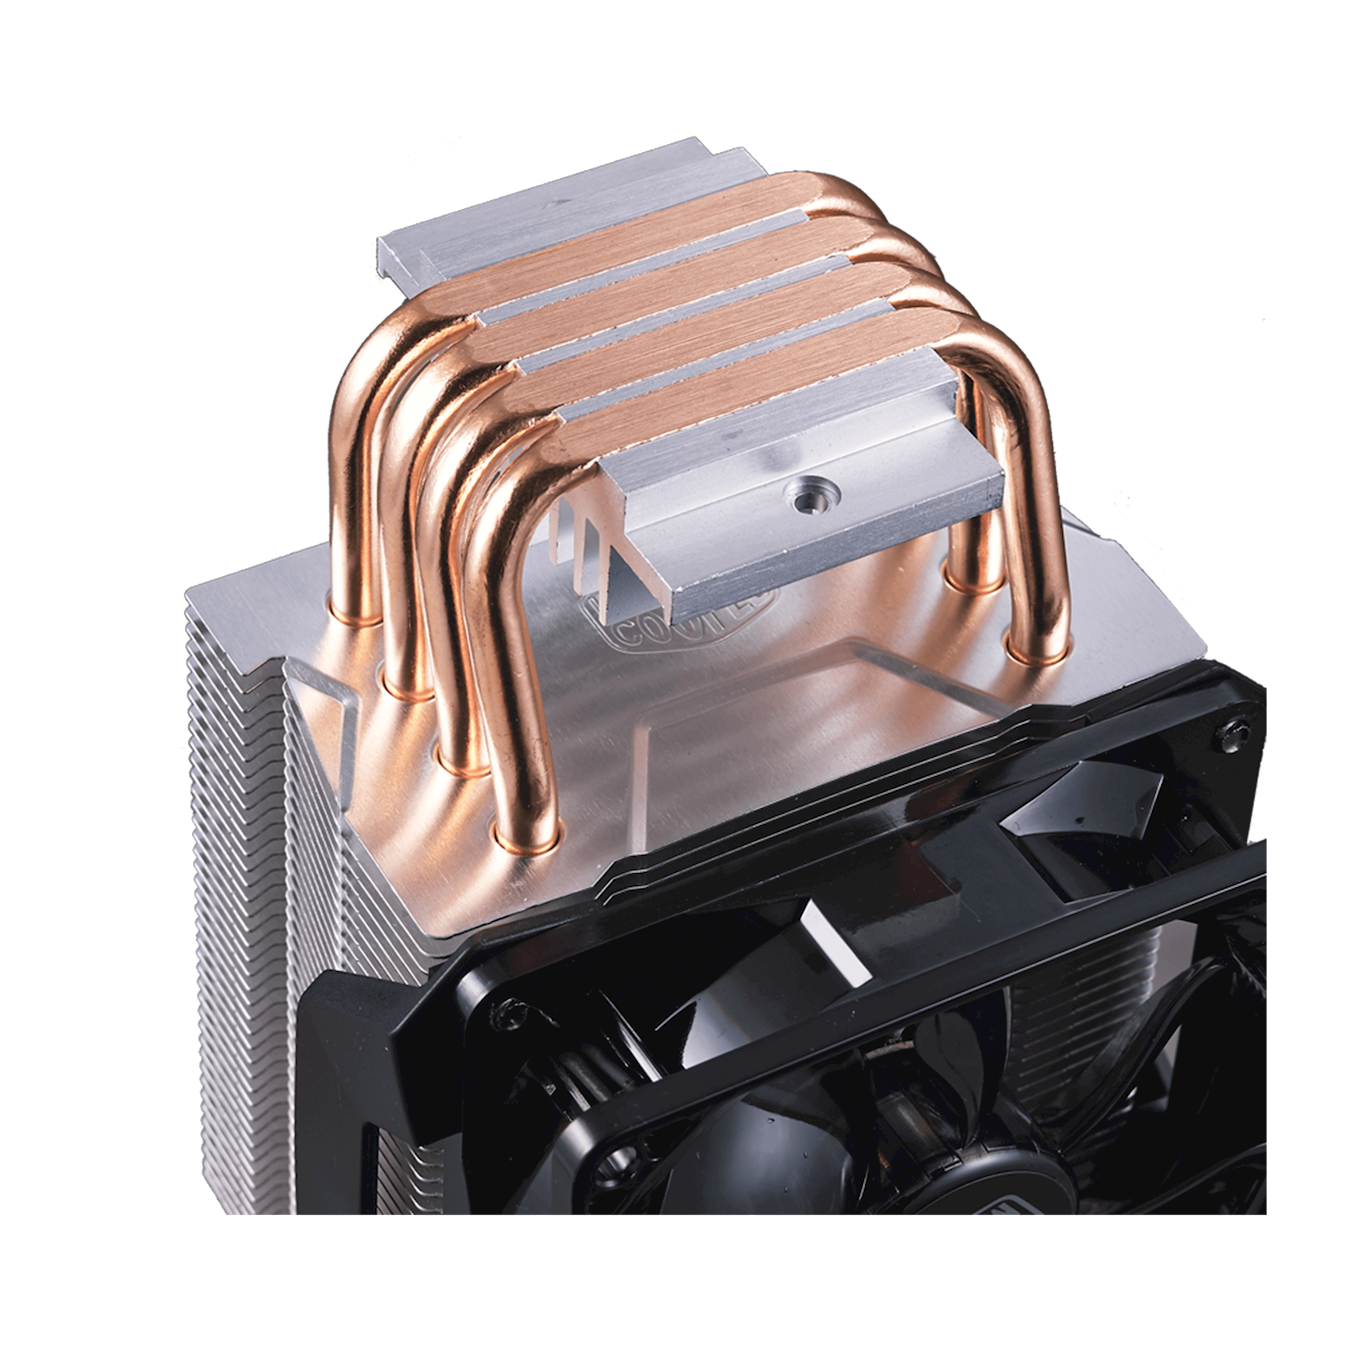 Stacked fin array ensures minimum airflow resistance allowing cooler air into the heatsink.